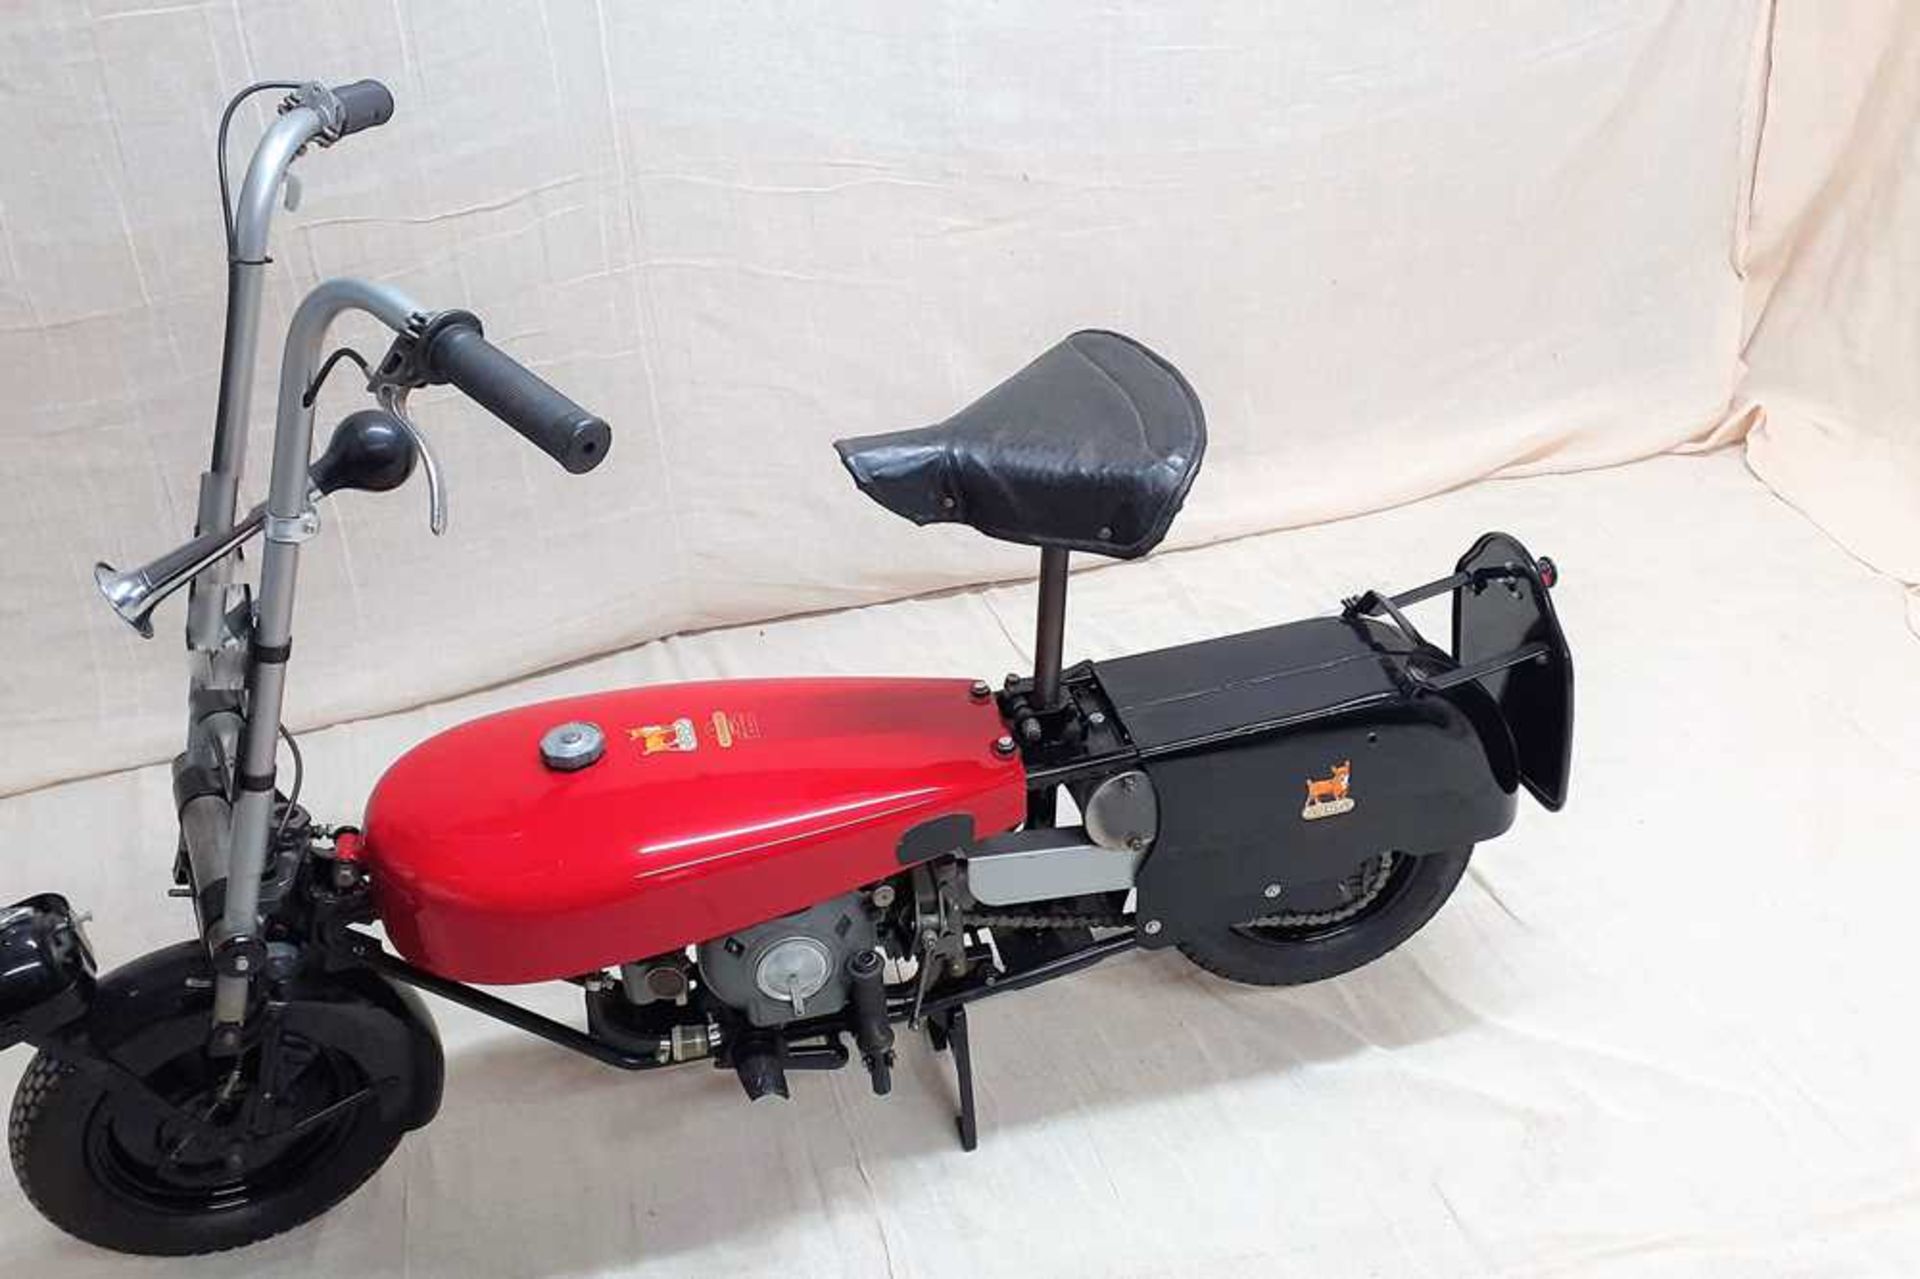 3x Corgi Motorcycles All are to be sold as one LOT - Image 14 of 30